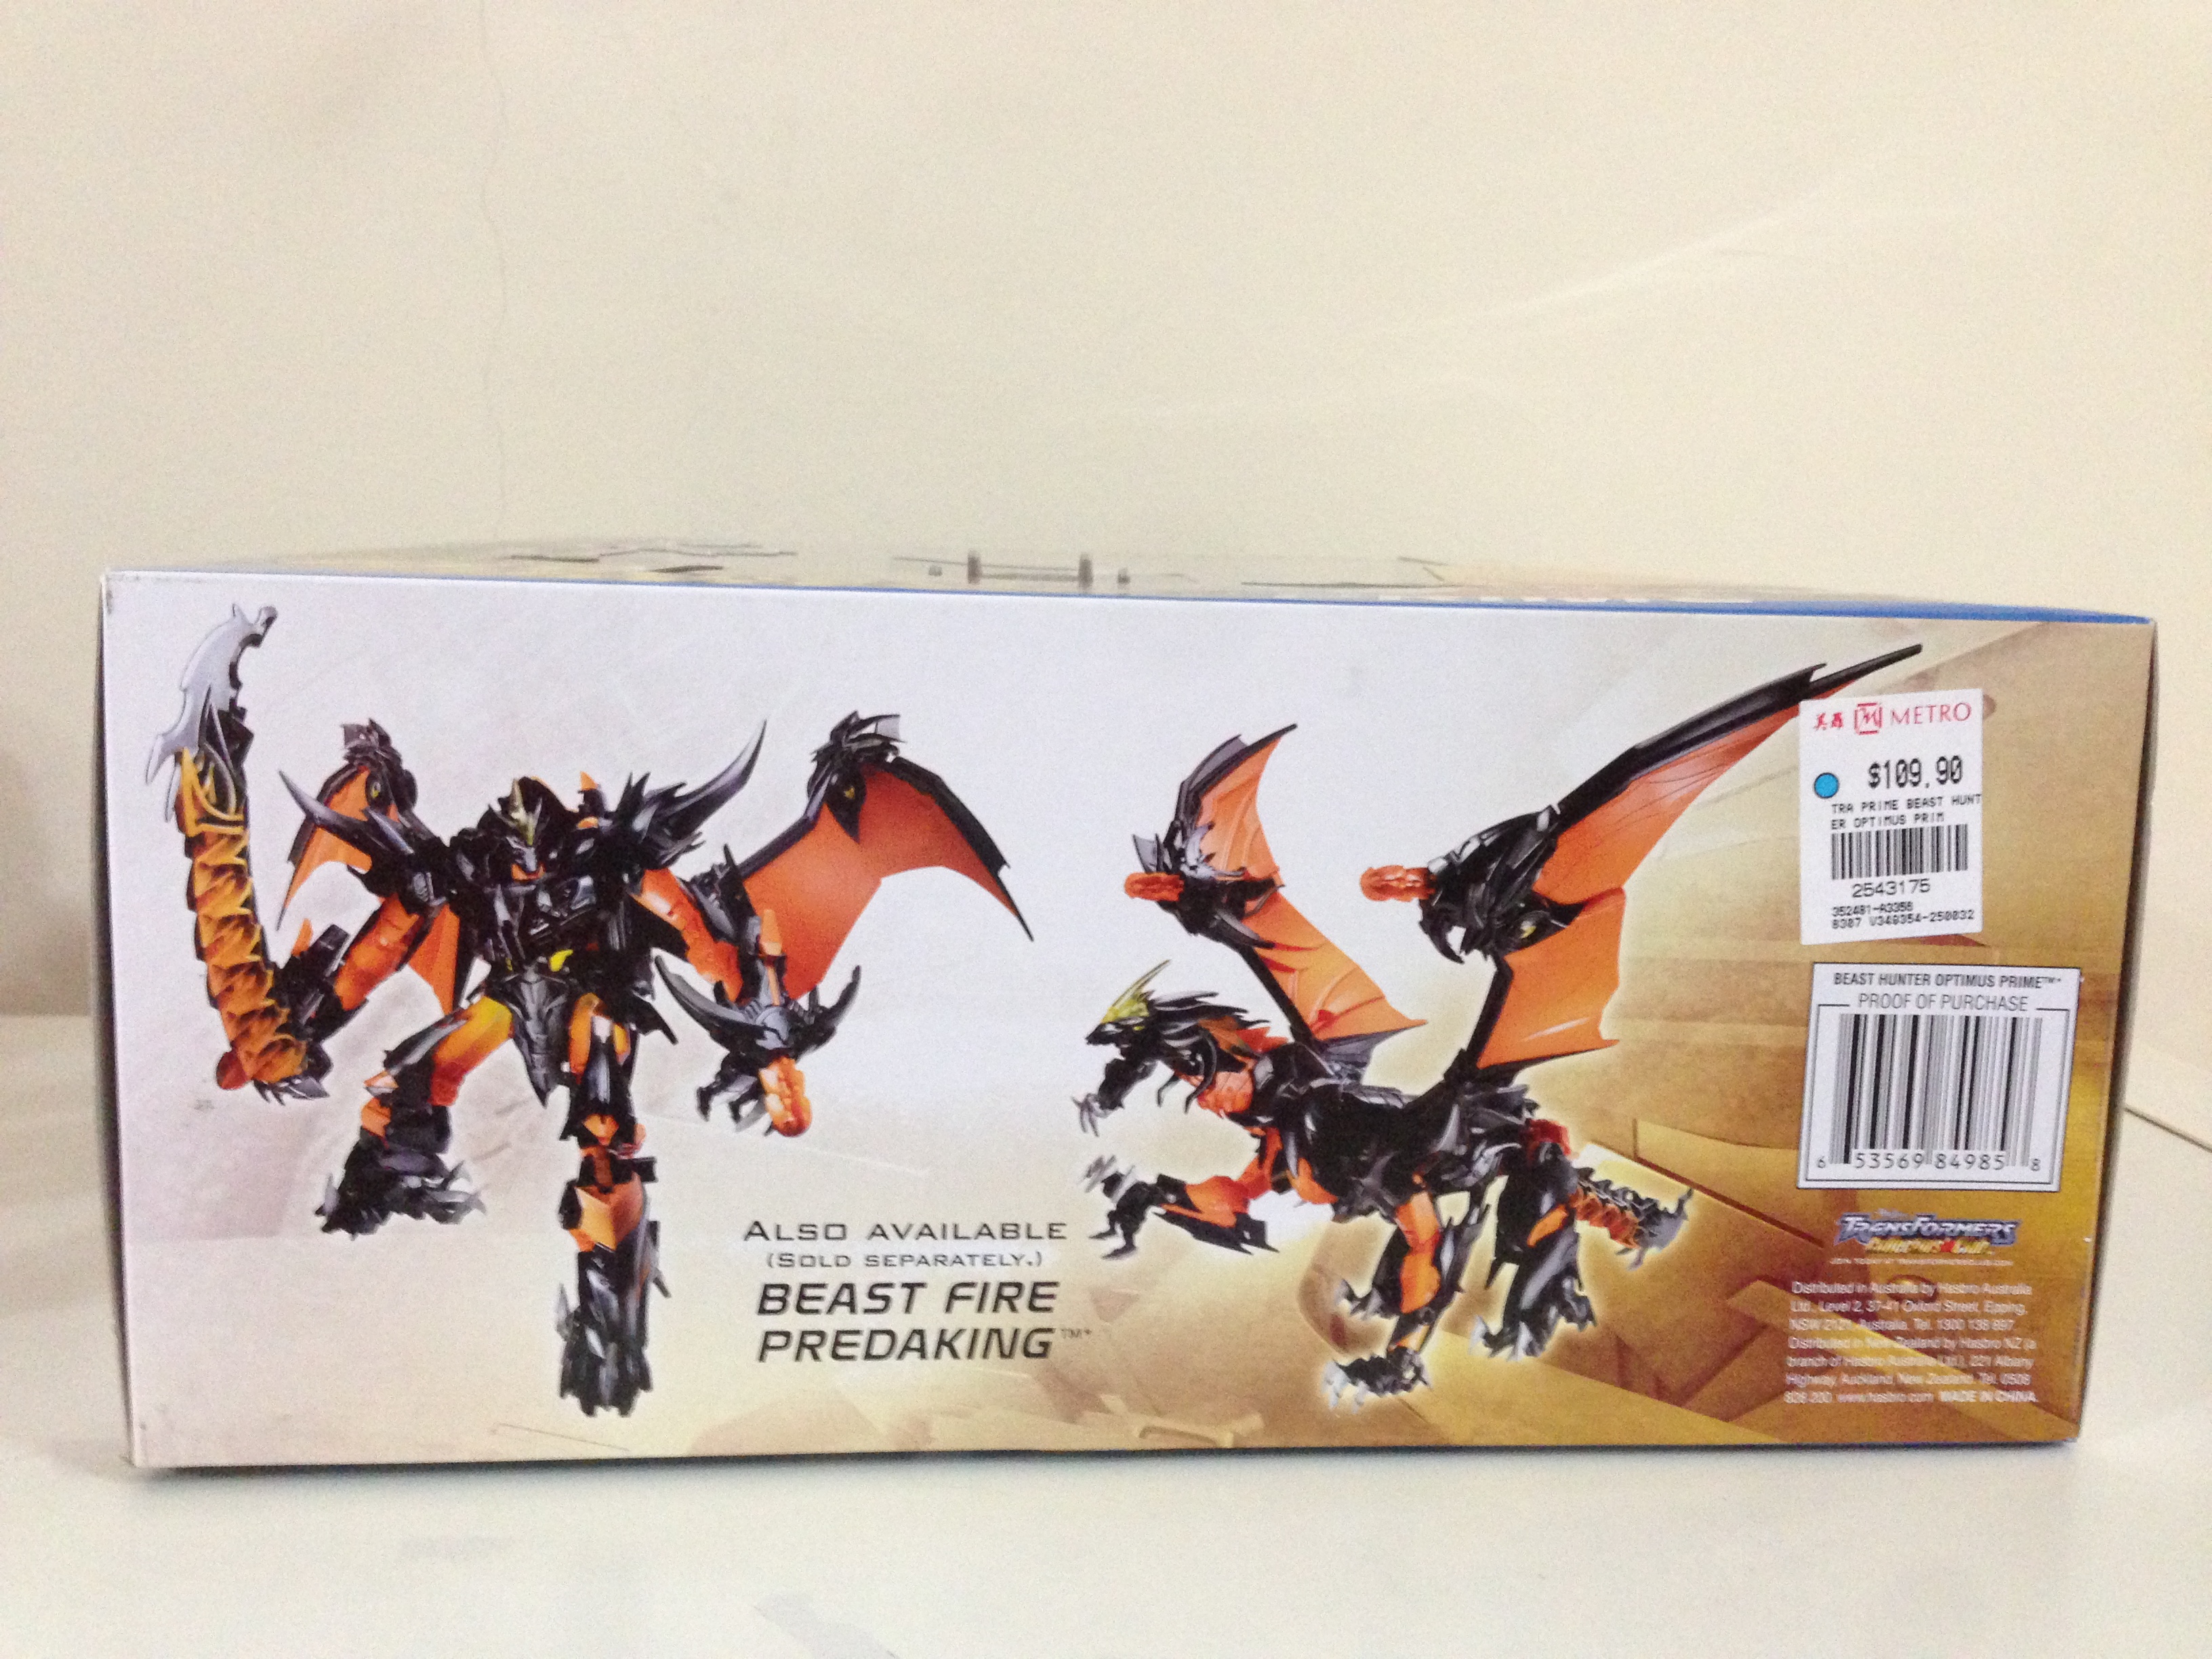 Blog #407: Toy Review: Transformers: Prime Beast Hunters Ultimate